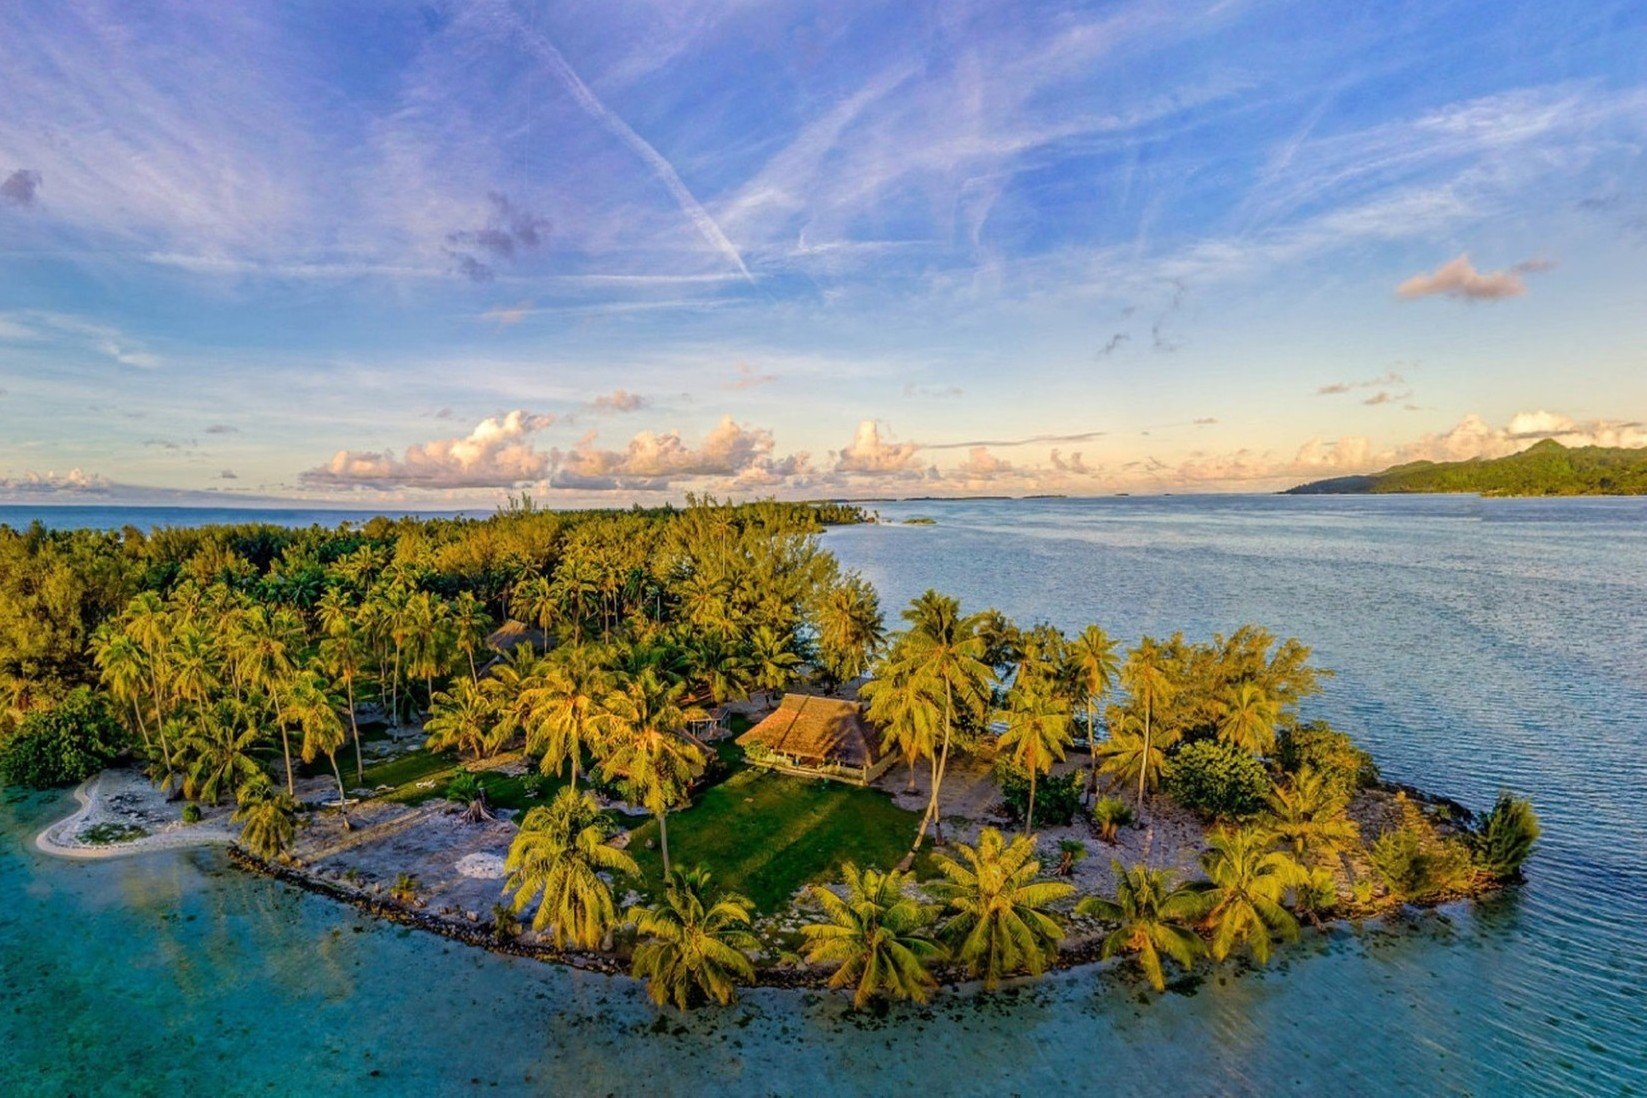 How much is a private island: Motu Moie, Society Islands, French Polynesia, $6,500,000.